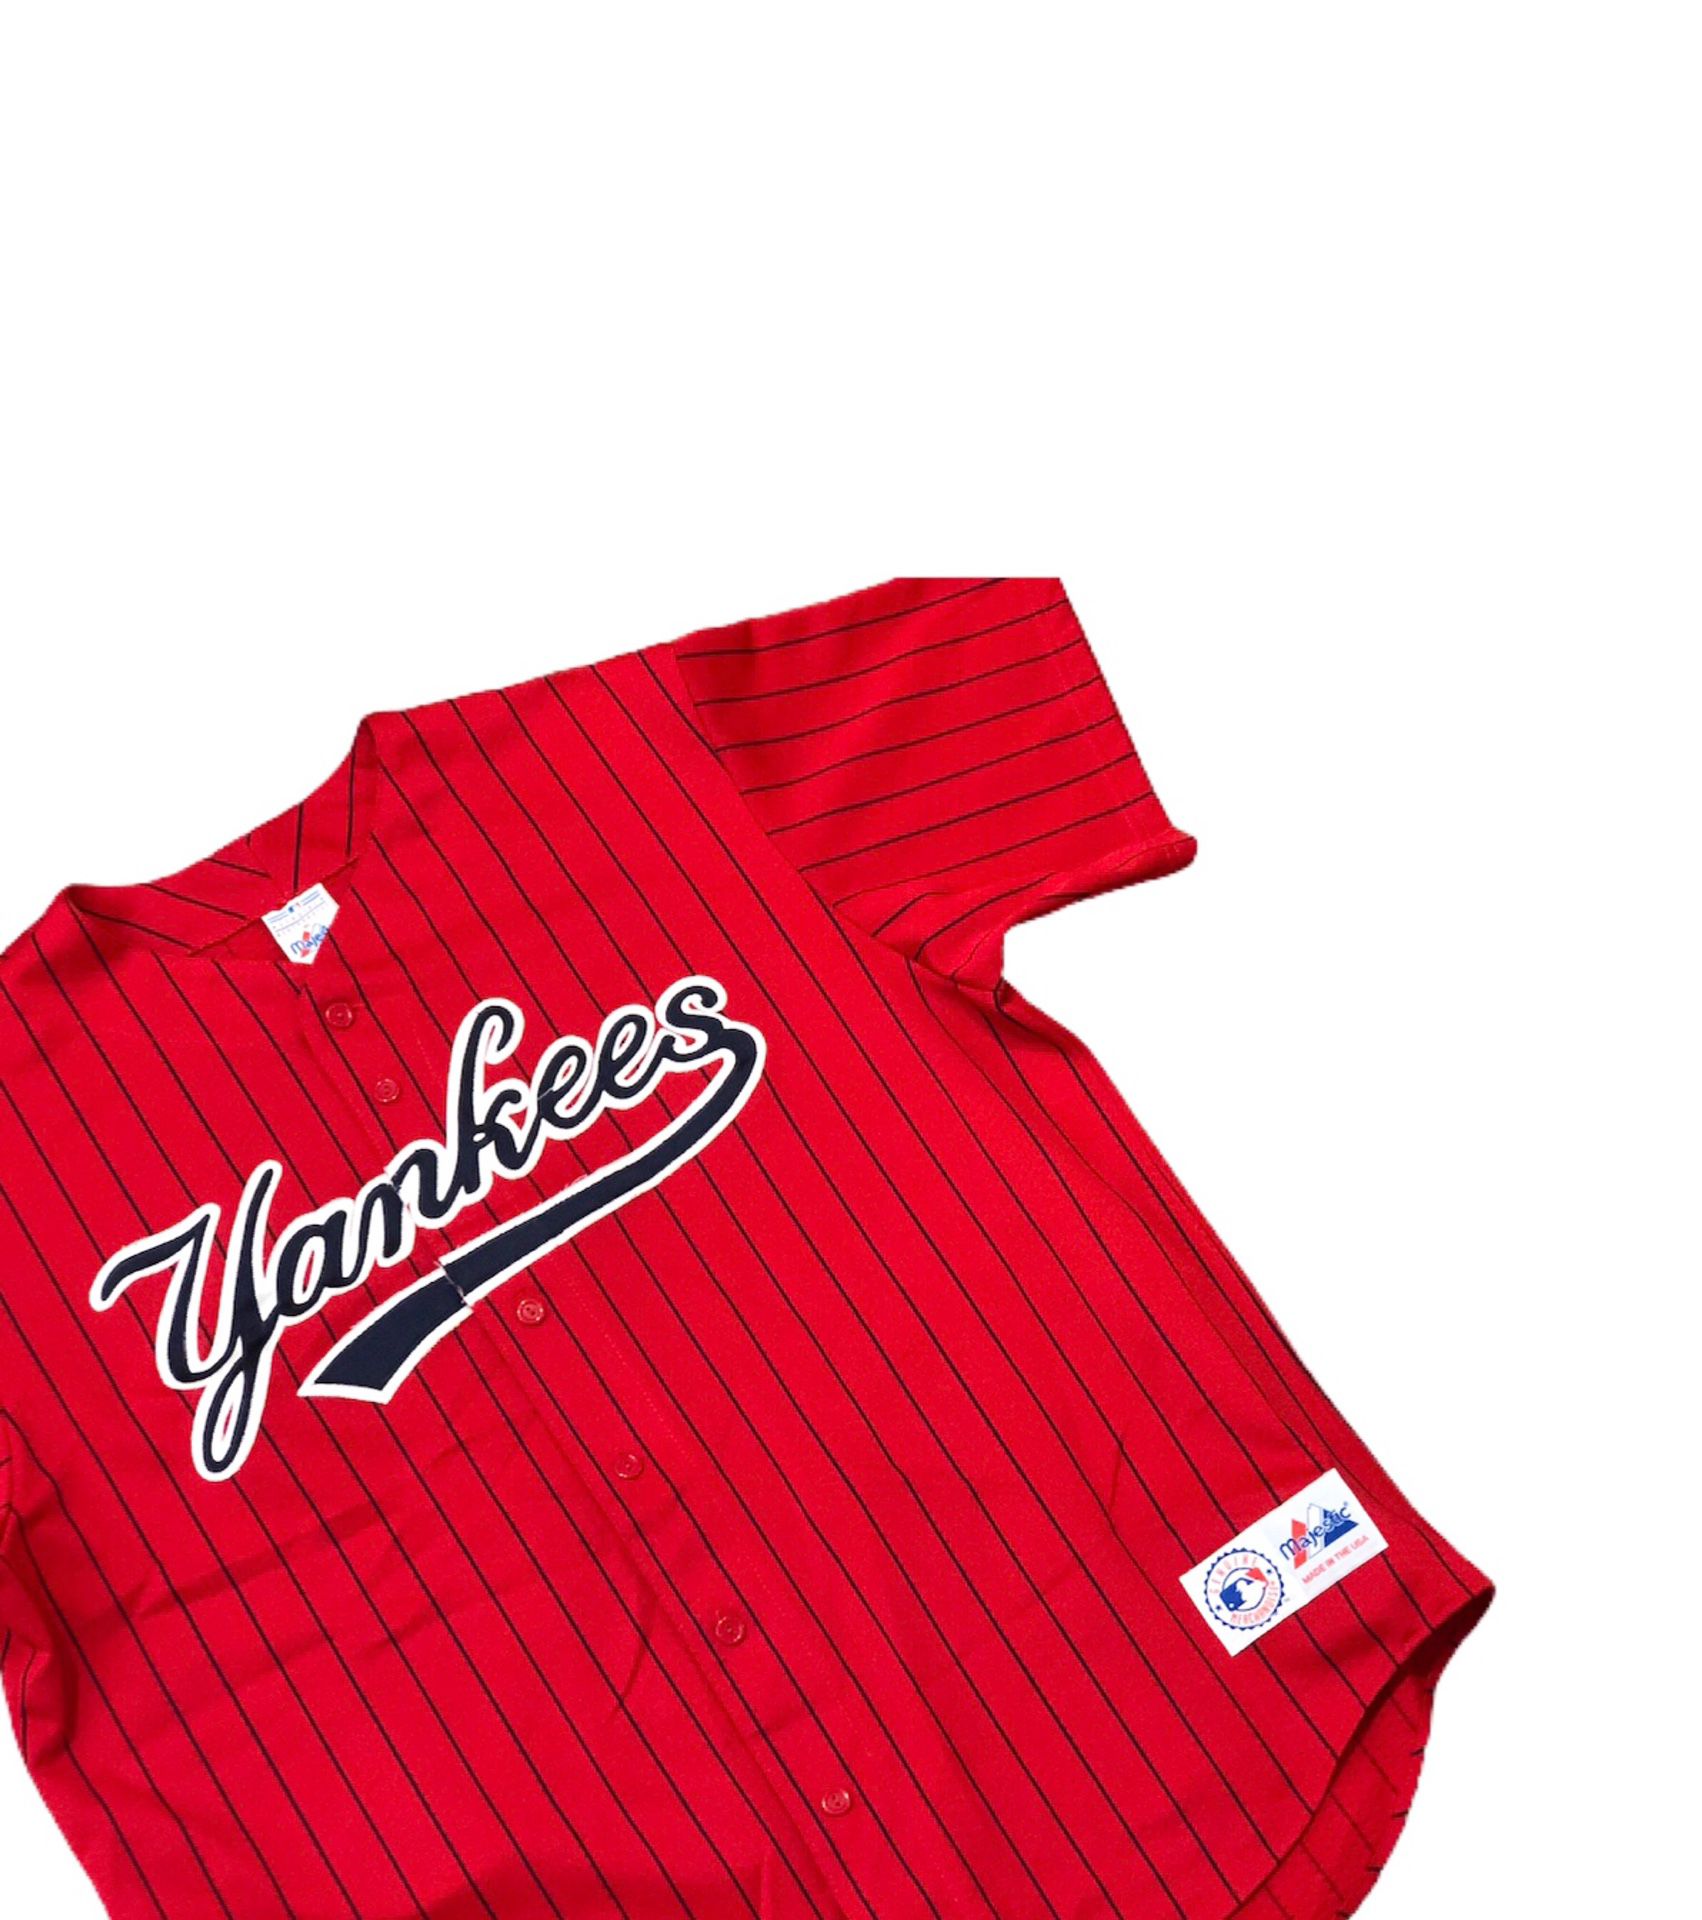 Vintage MLB 90s Majestic New York Yankees Pinstripe Red Baseball Jersey Sz  XXL for Sale in Tempe, AZ - OfferUp